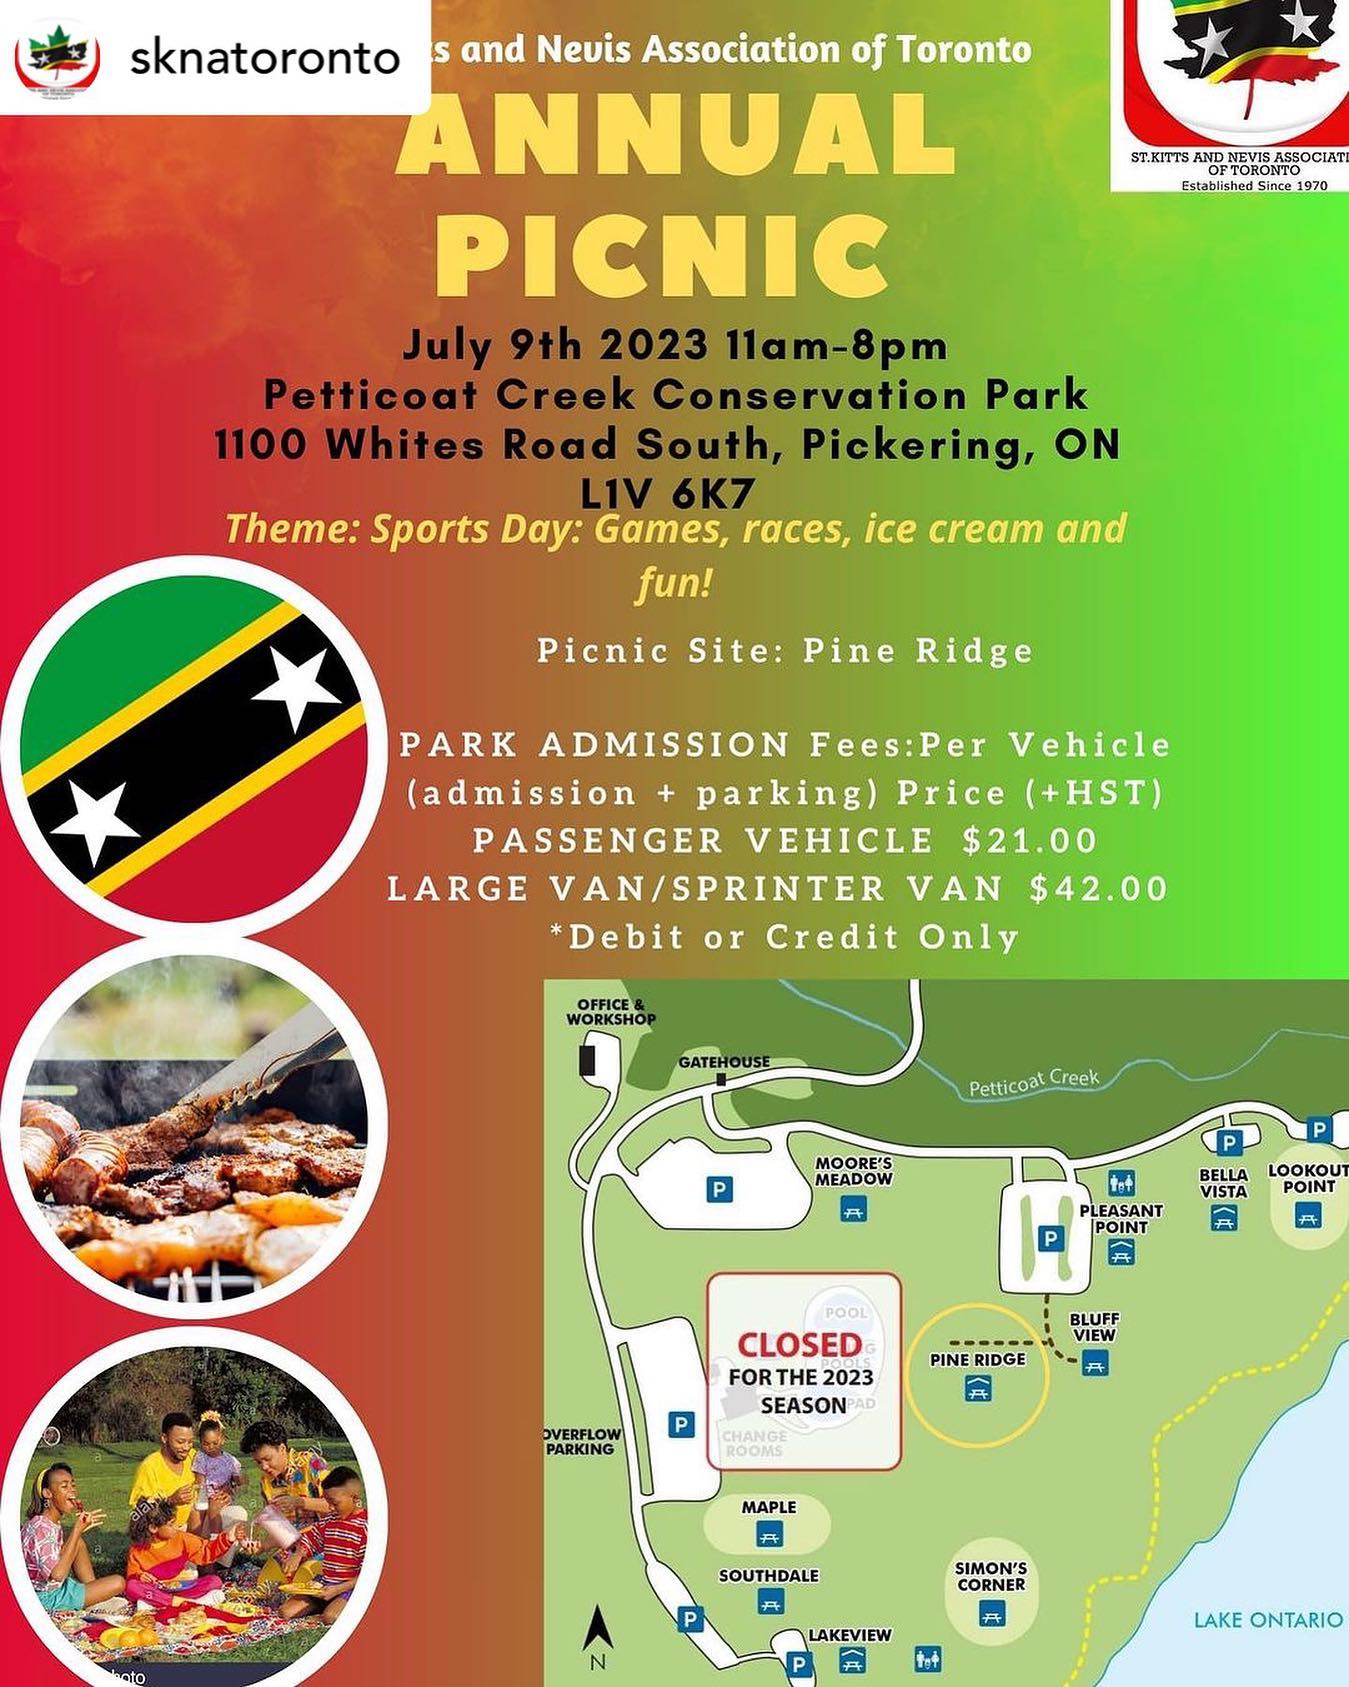 SKNA - Our annual picnic is Sunday July 9th…food, games, fun and more!! Bring your family, food and enjoy Sports Day!!